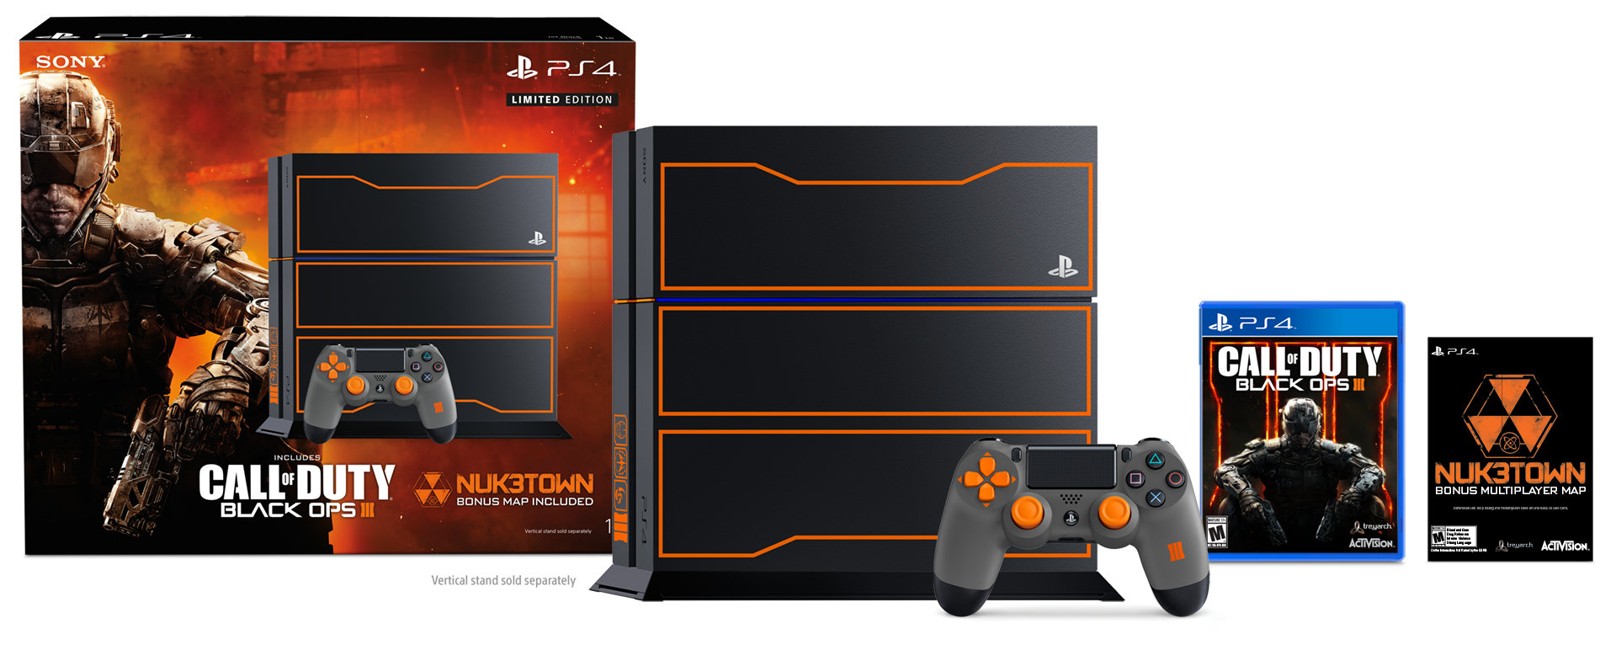 Playstation 4 Console 1TB - Call of Duty: Black Ops III (3) Limited Edition Bundle